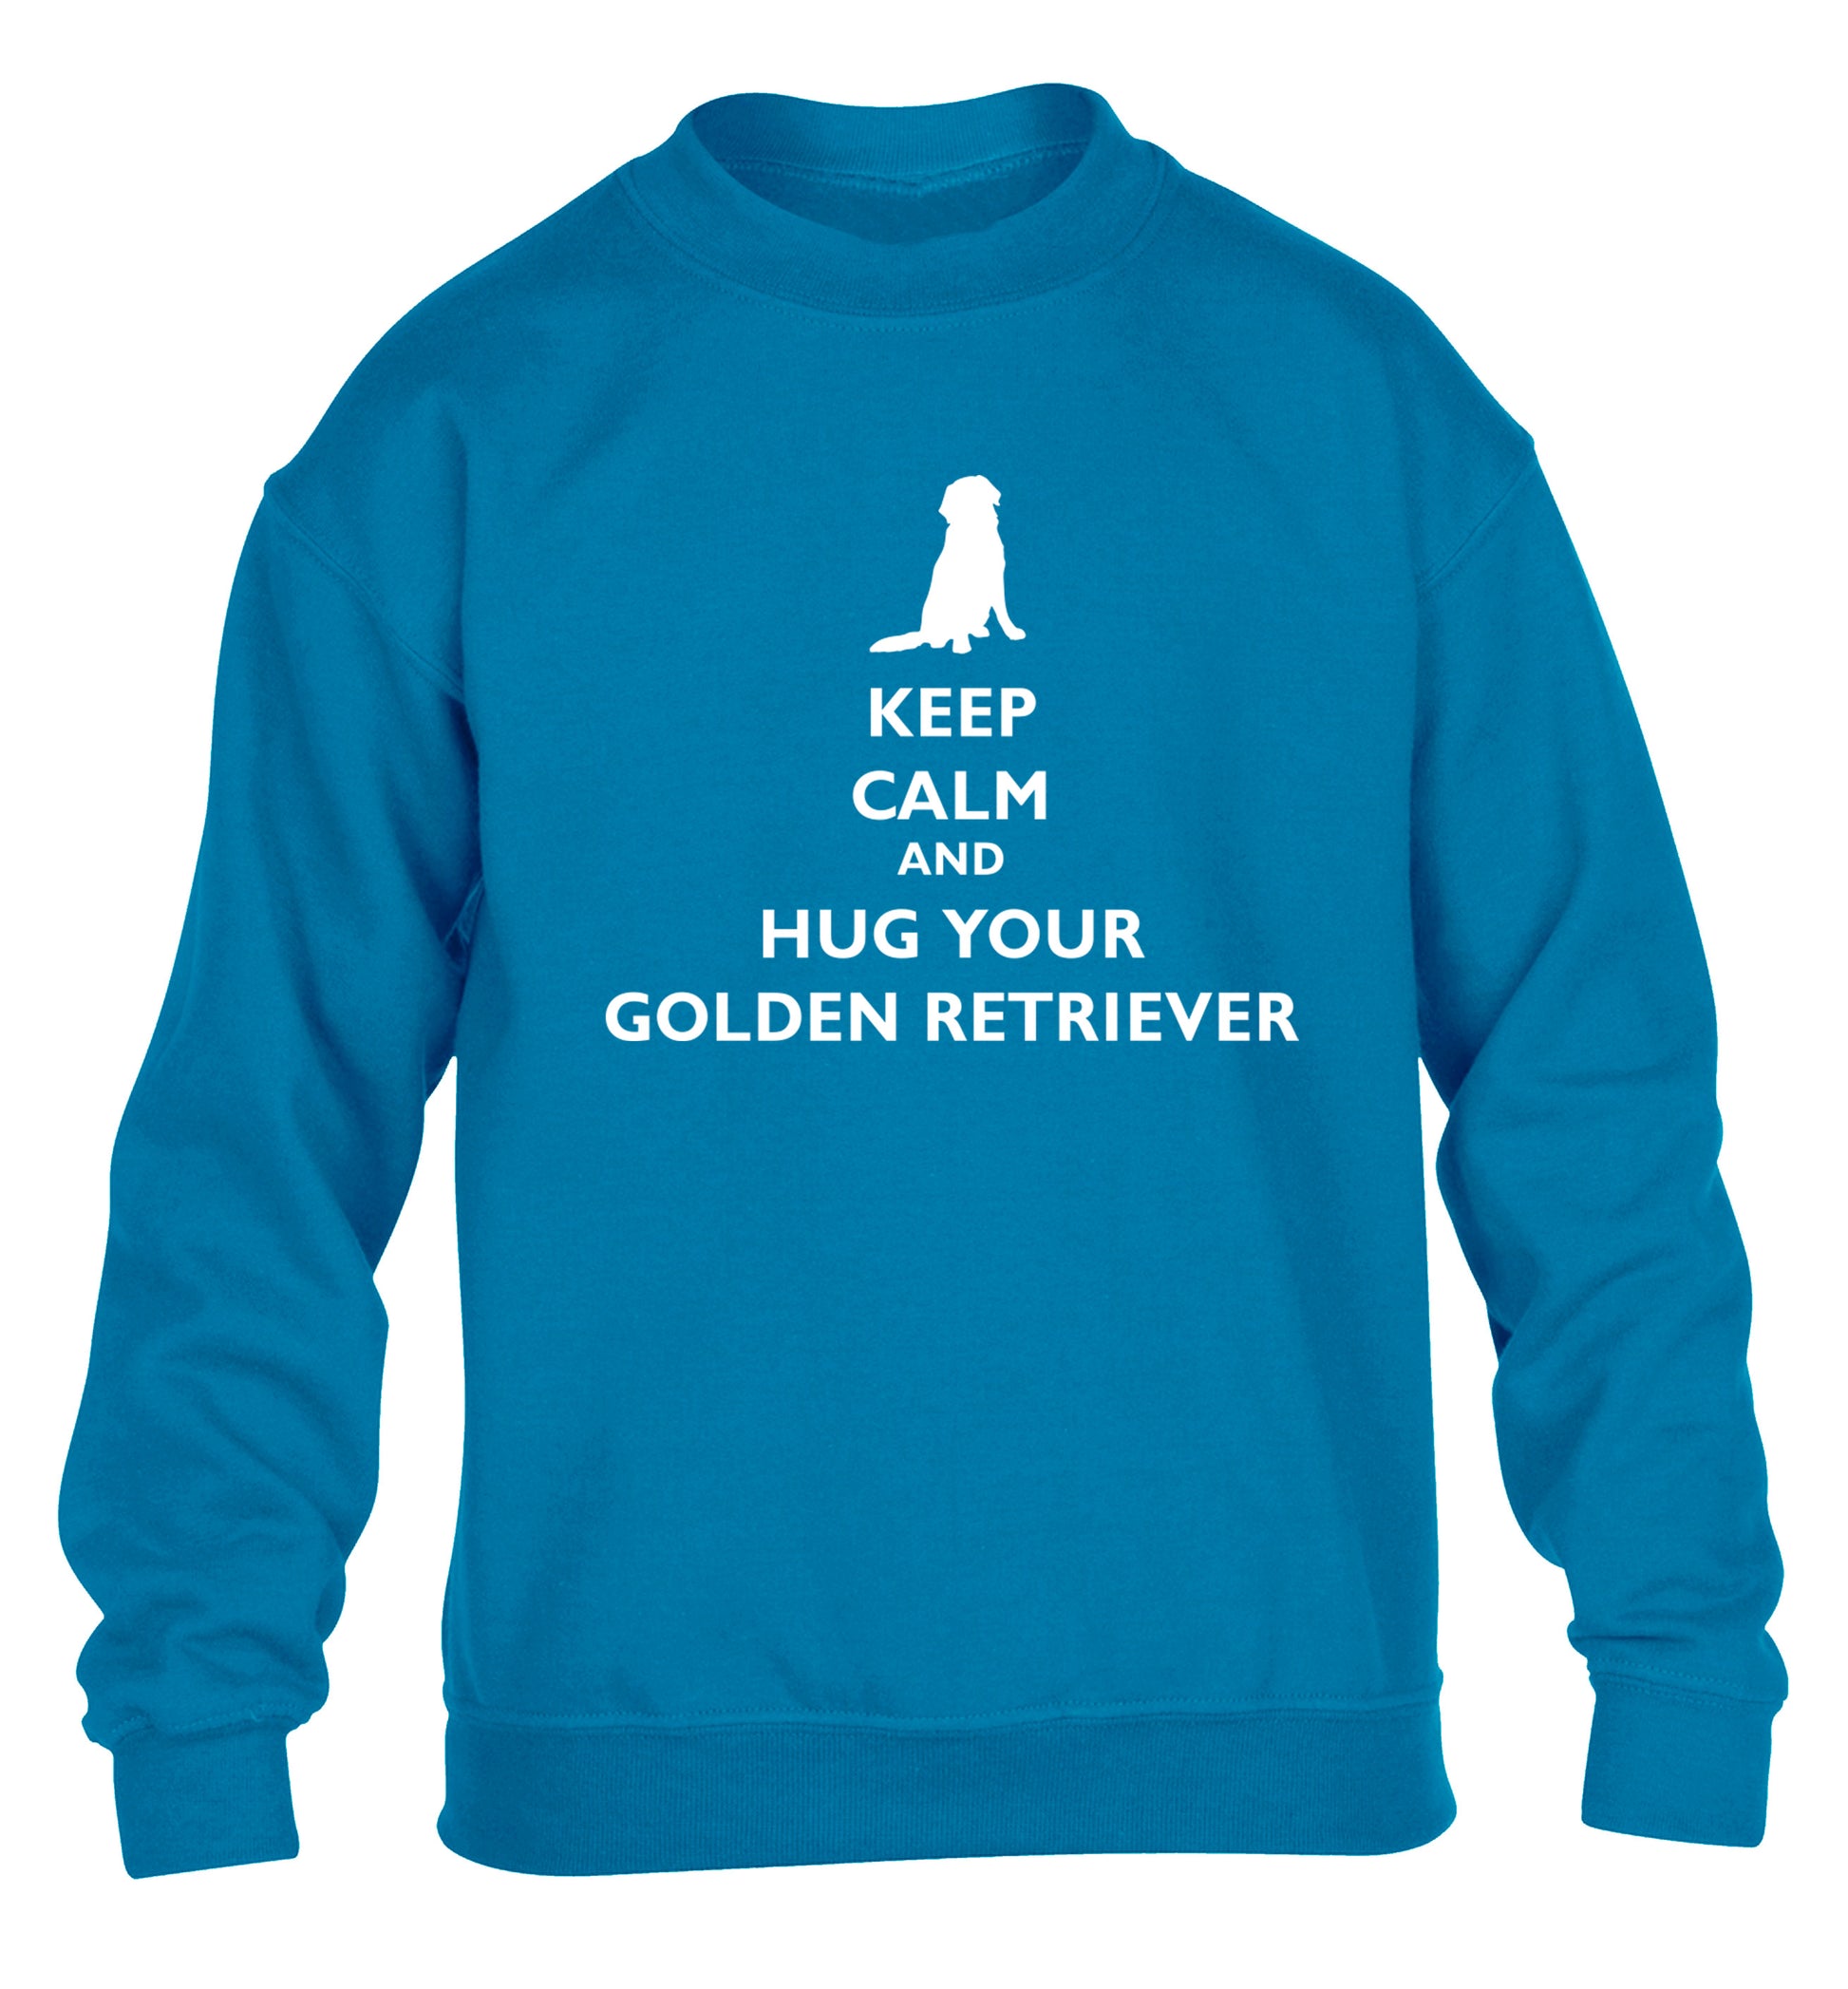 Keep calm and hug your golden retriever children's blue sweater 12-13 Years